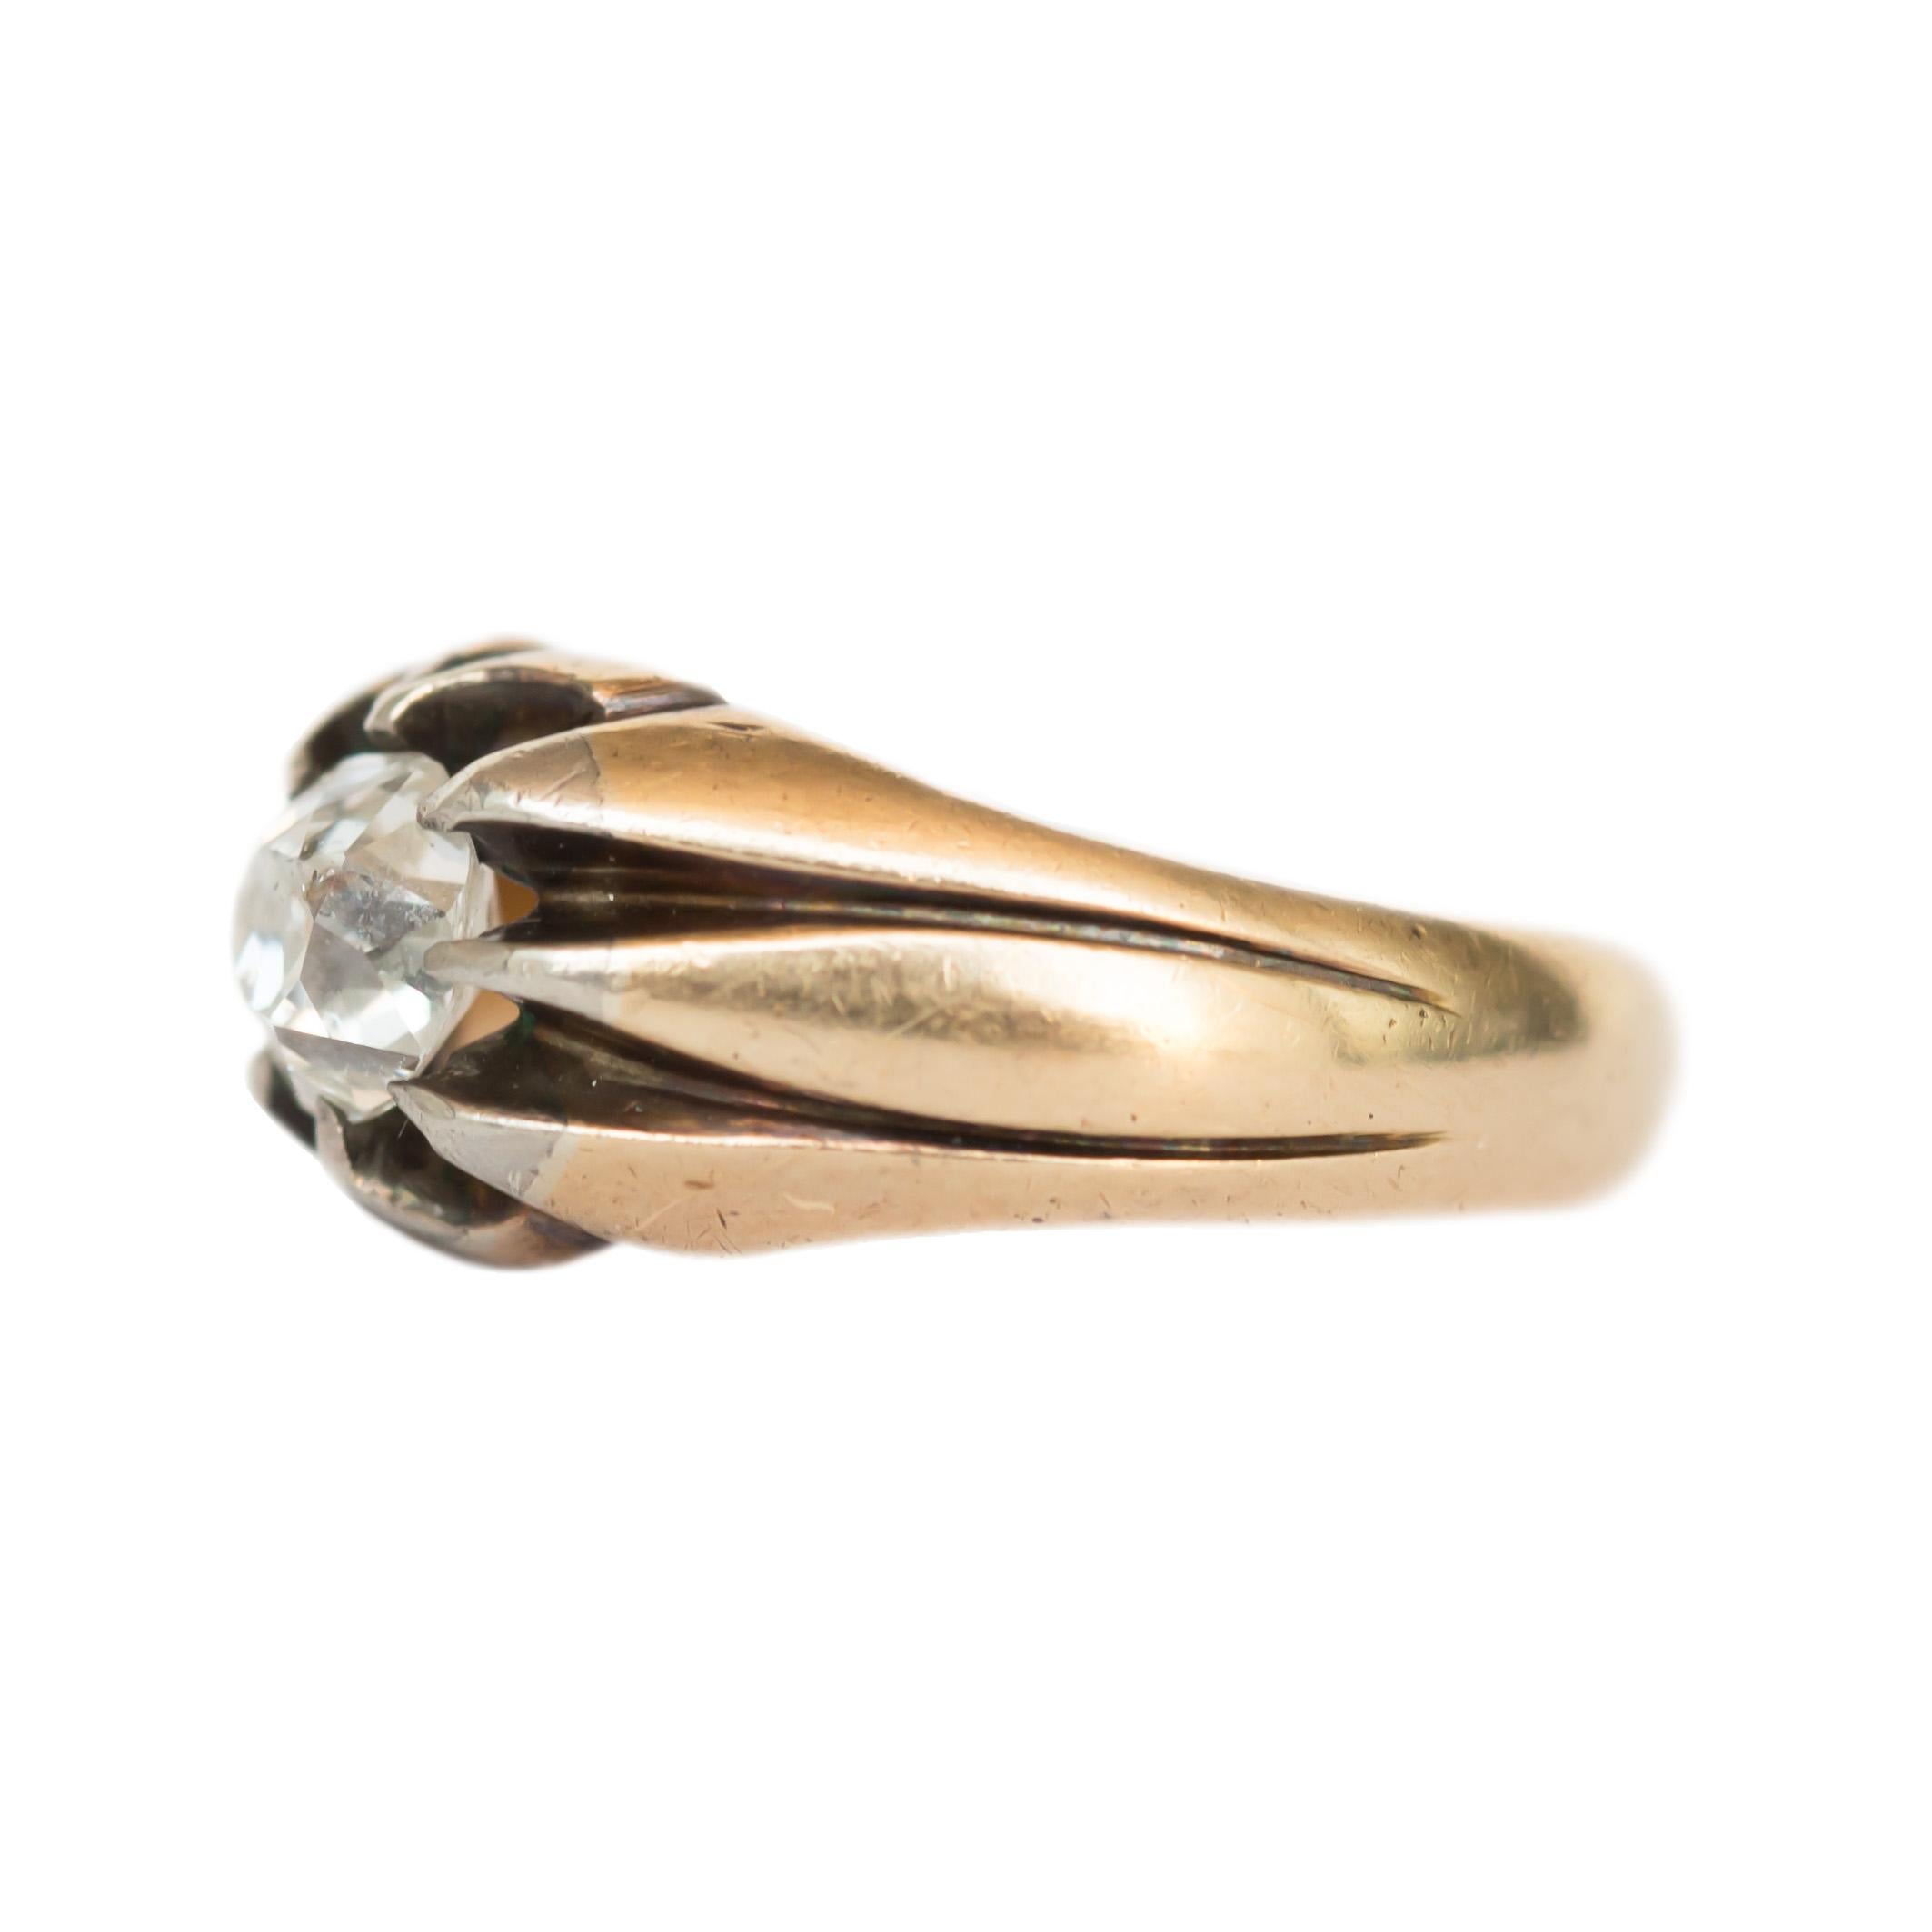 Item Details: 
Ring Size: 6
Metal Type: 18 Karat Yellow Gold 
Weight: 5.0 grams

Center Diamond Details
Shape: Old Mine Cushion
Carat Weight: .50 carat
Color: J
Clarity: SI1

Finger to Top of Stone Measurement: 3.73mm